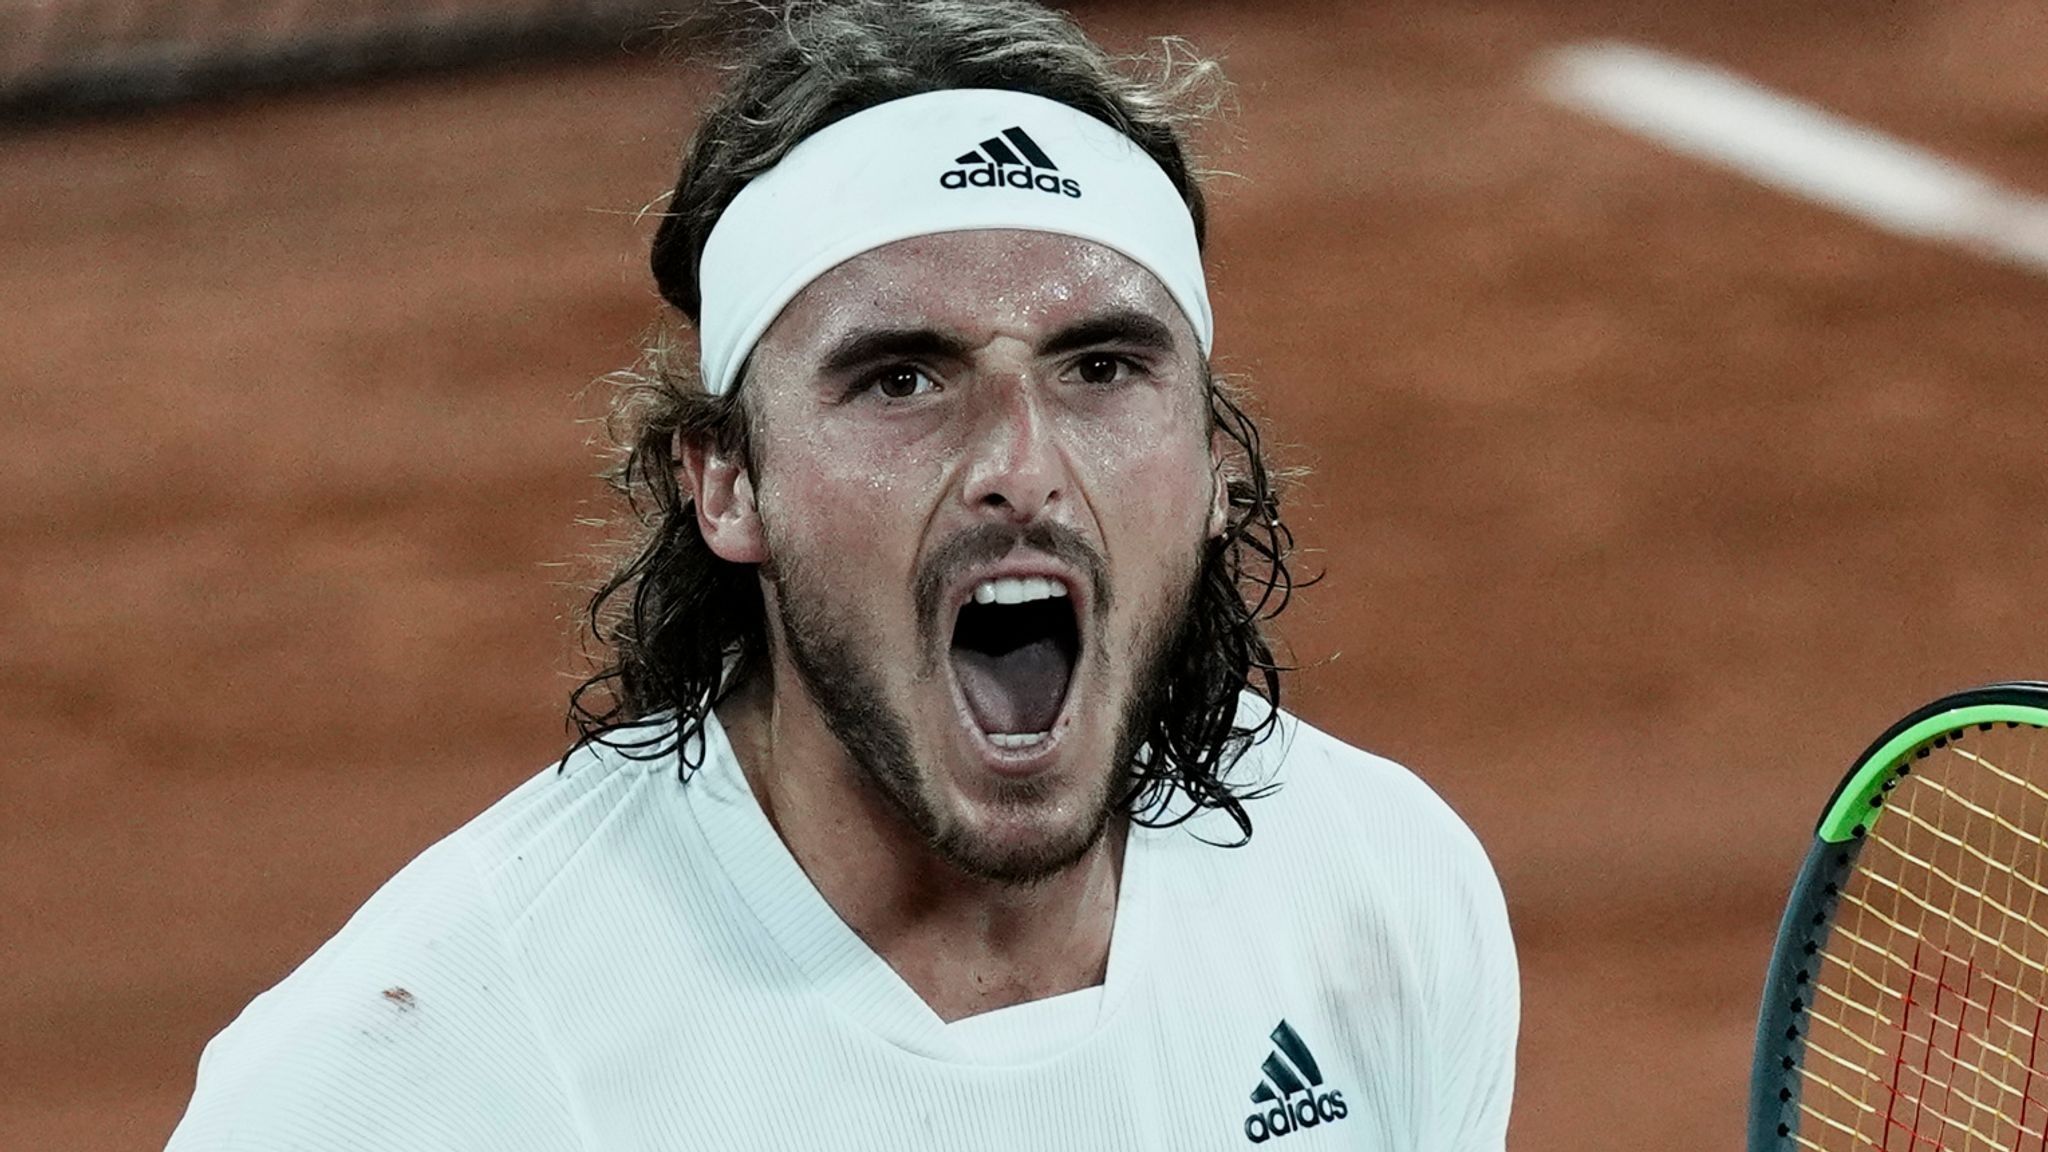 Coach Of Tsitsipas Walks Out On Athlete Because Of His Approach To Training